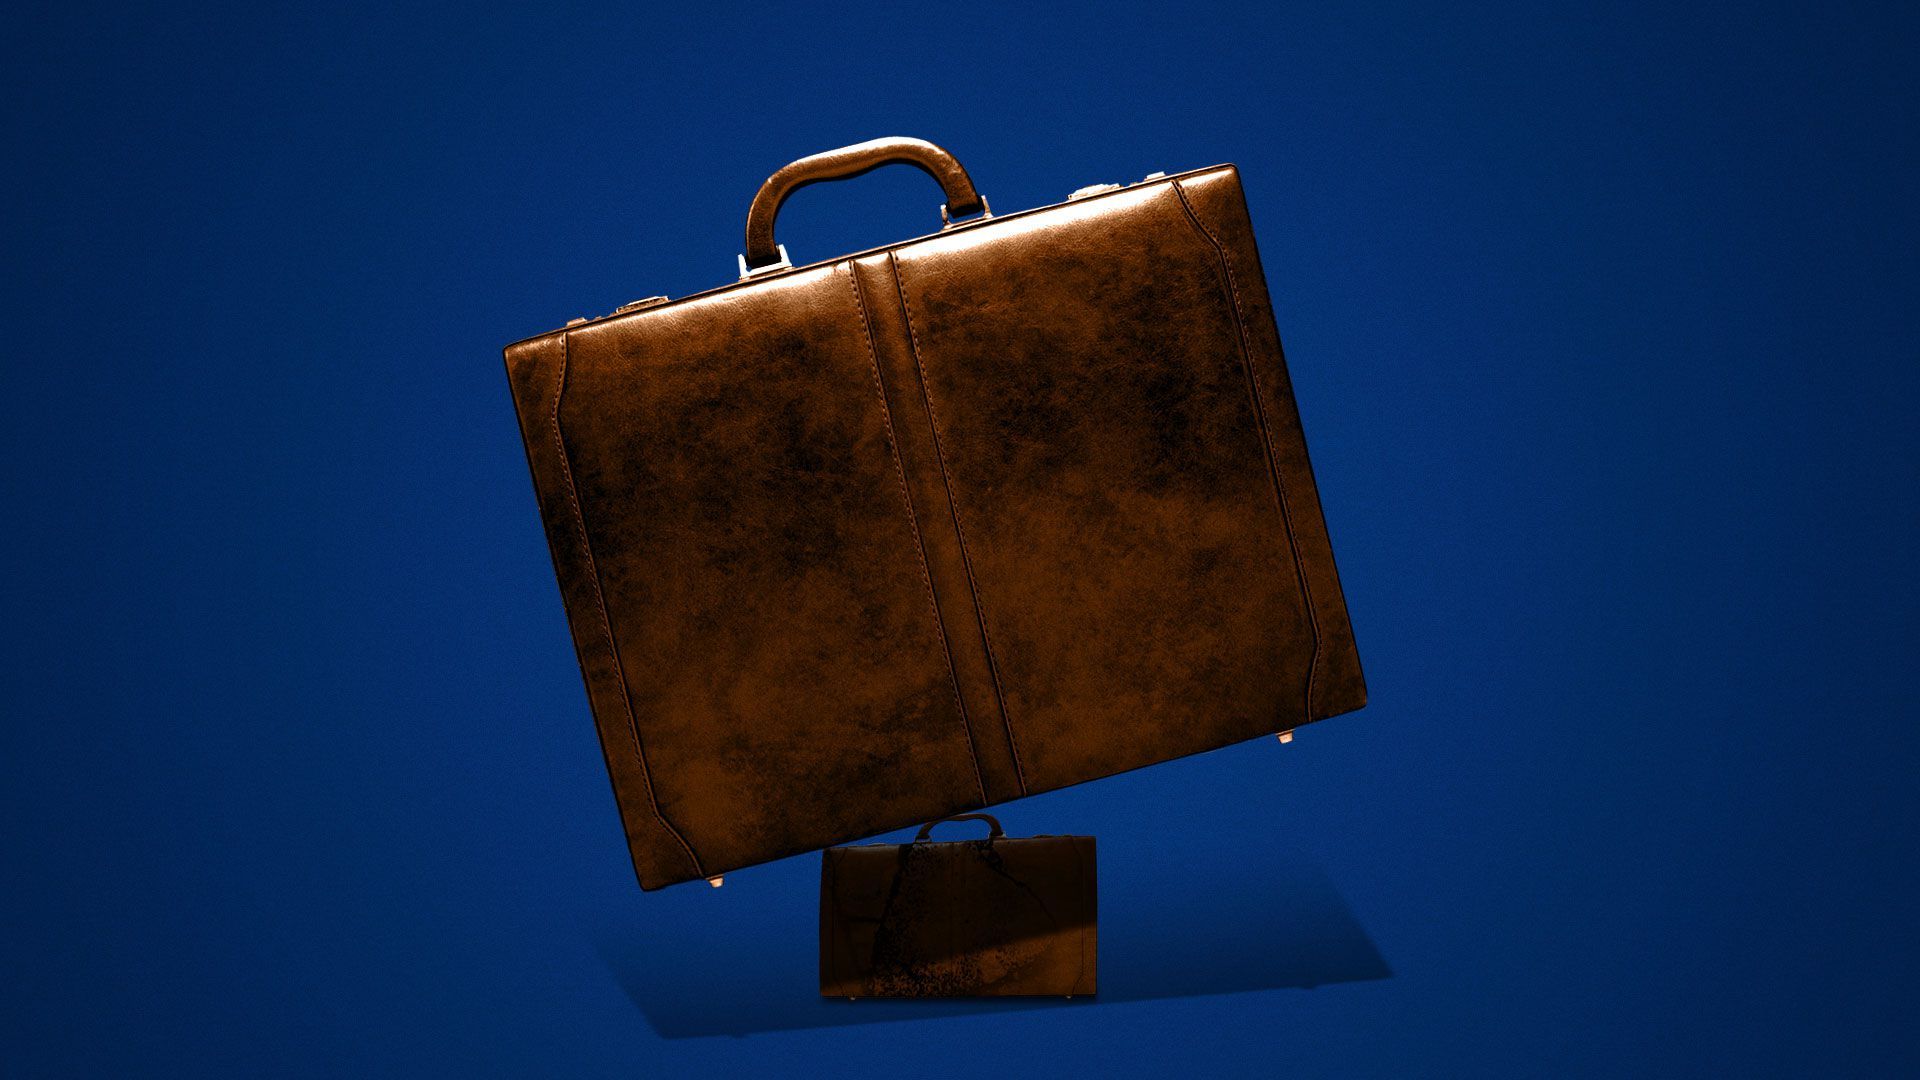 Illustration of large briefcase crushing a small briefcase.